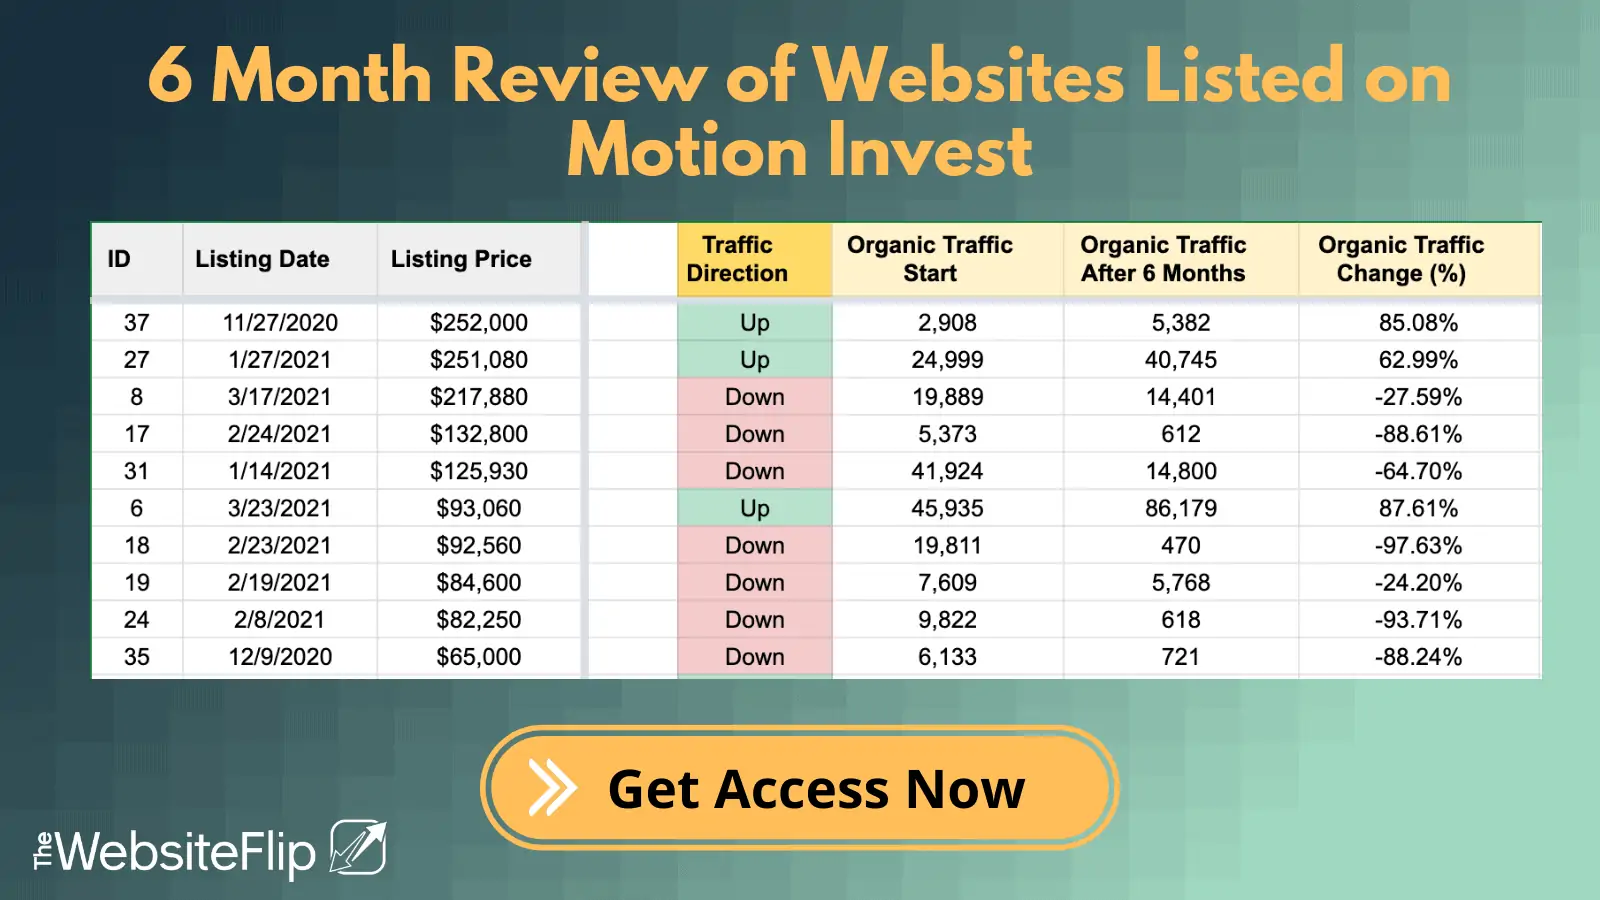 6 Month Review of Websites Listed on Motion Invest